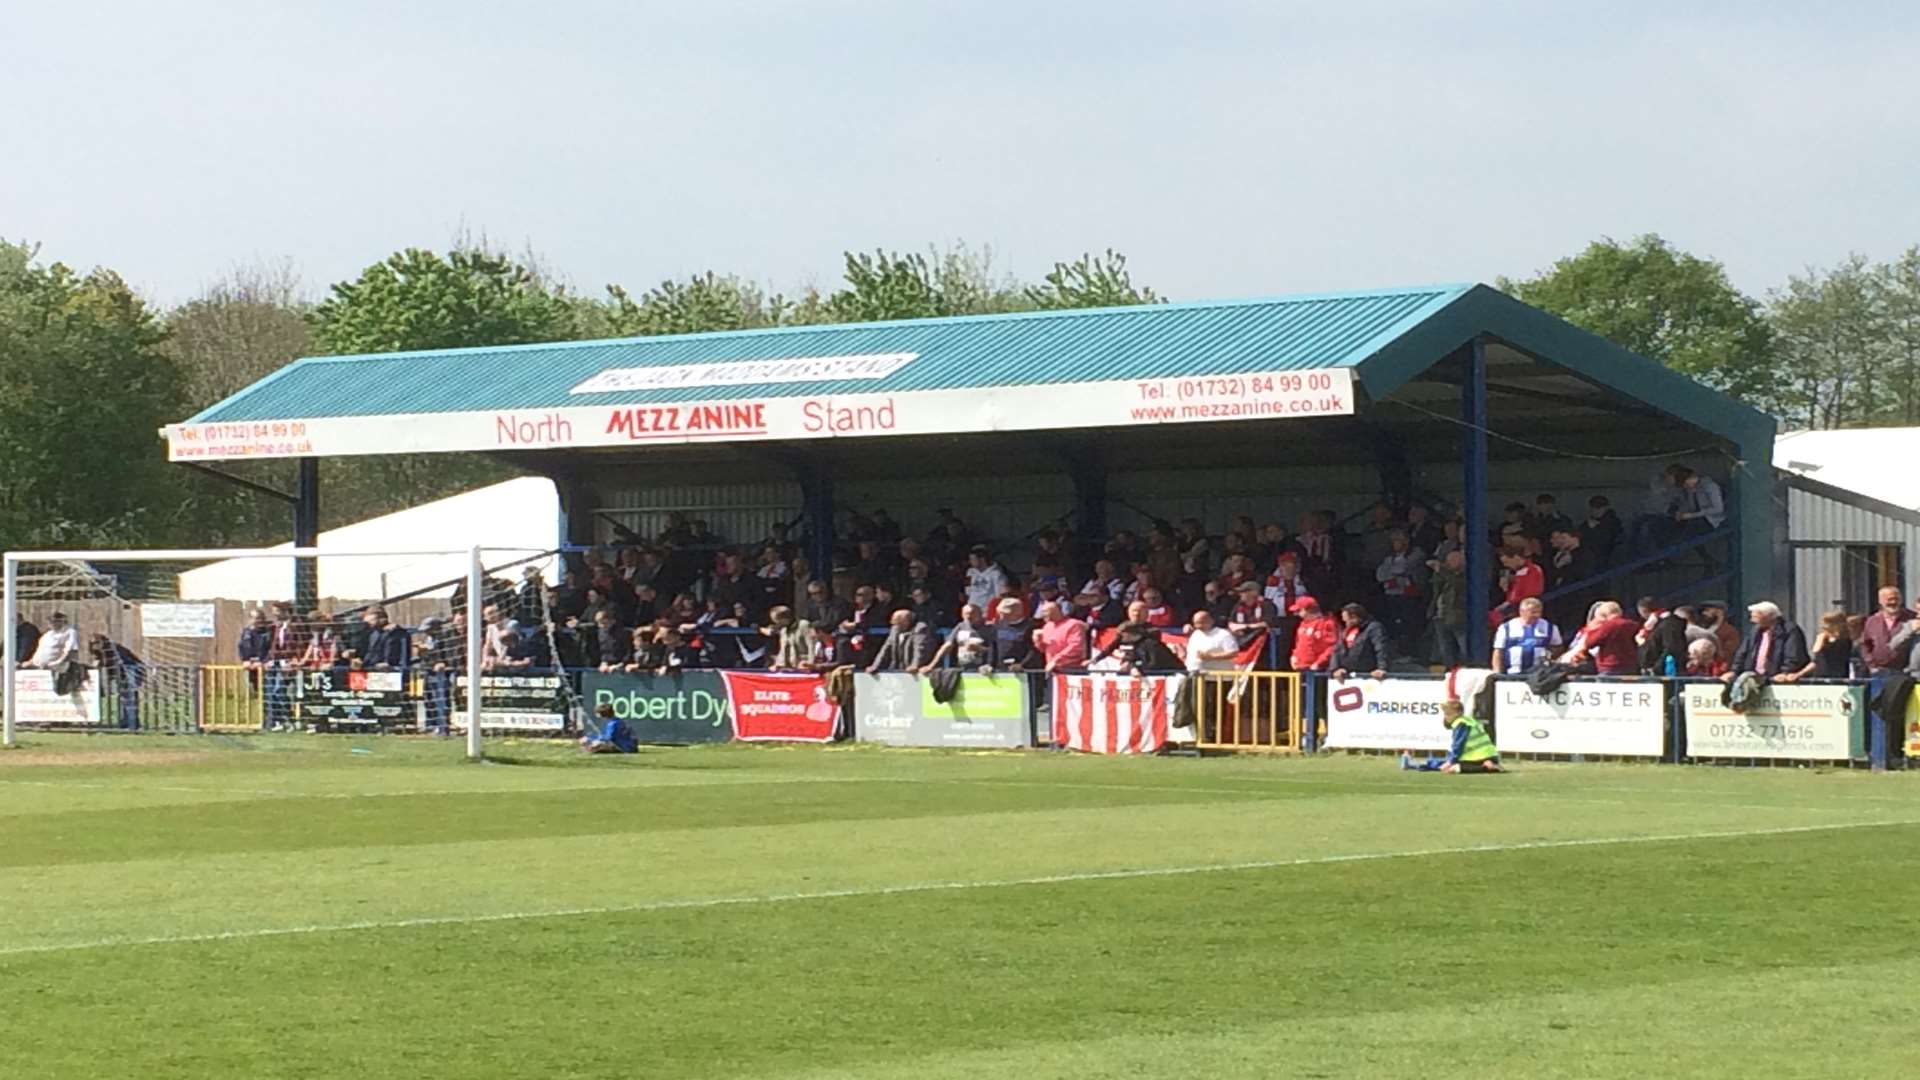 Sheppey were well supported at the Longmead Stadium